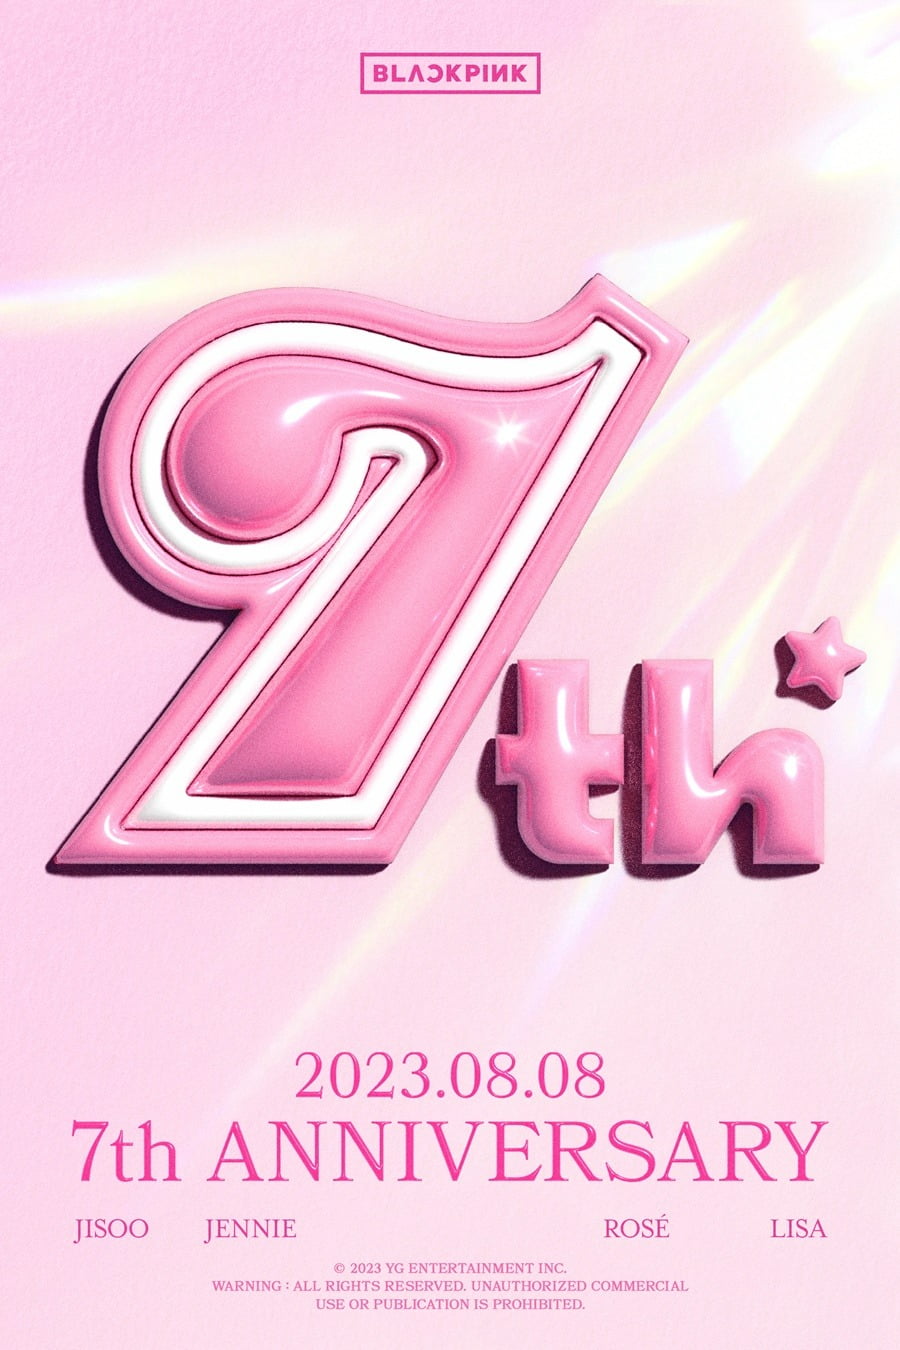 BLACKPINK has prepared an event for the 7th anniversary of their debut